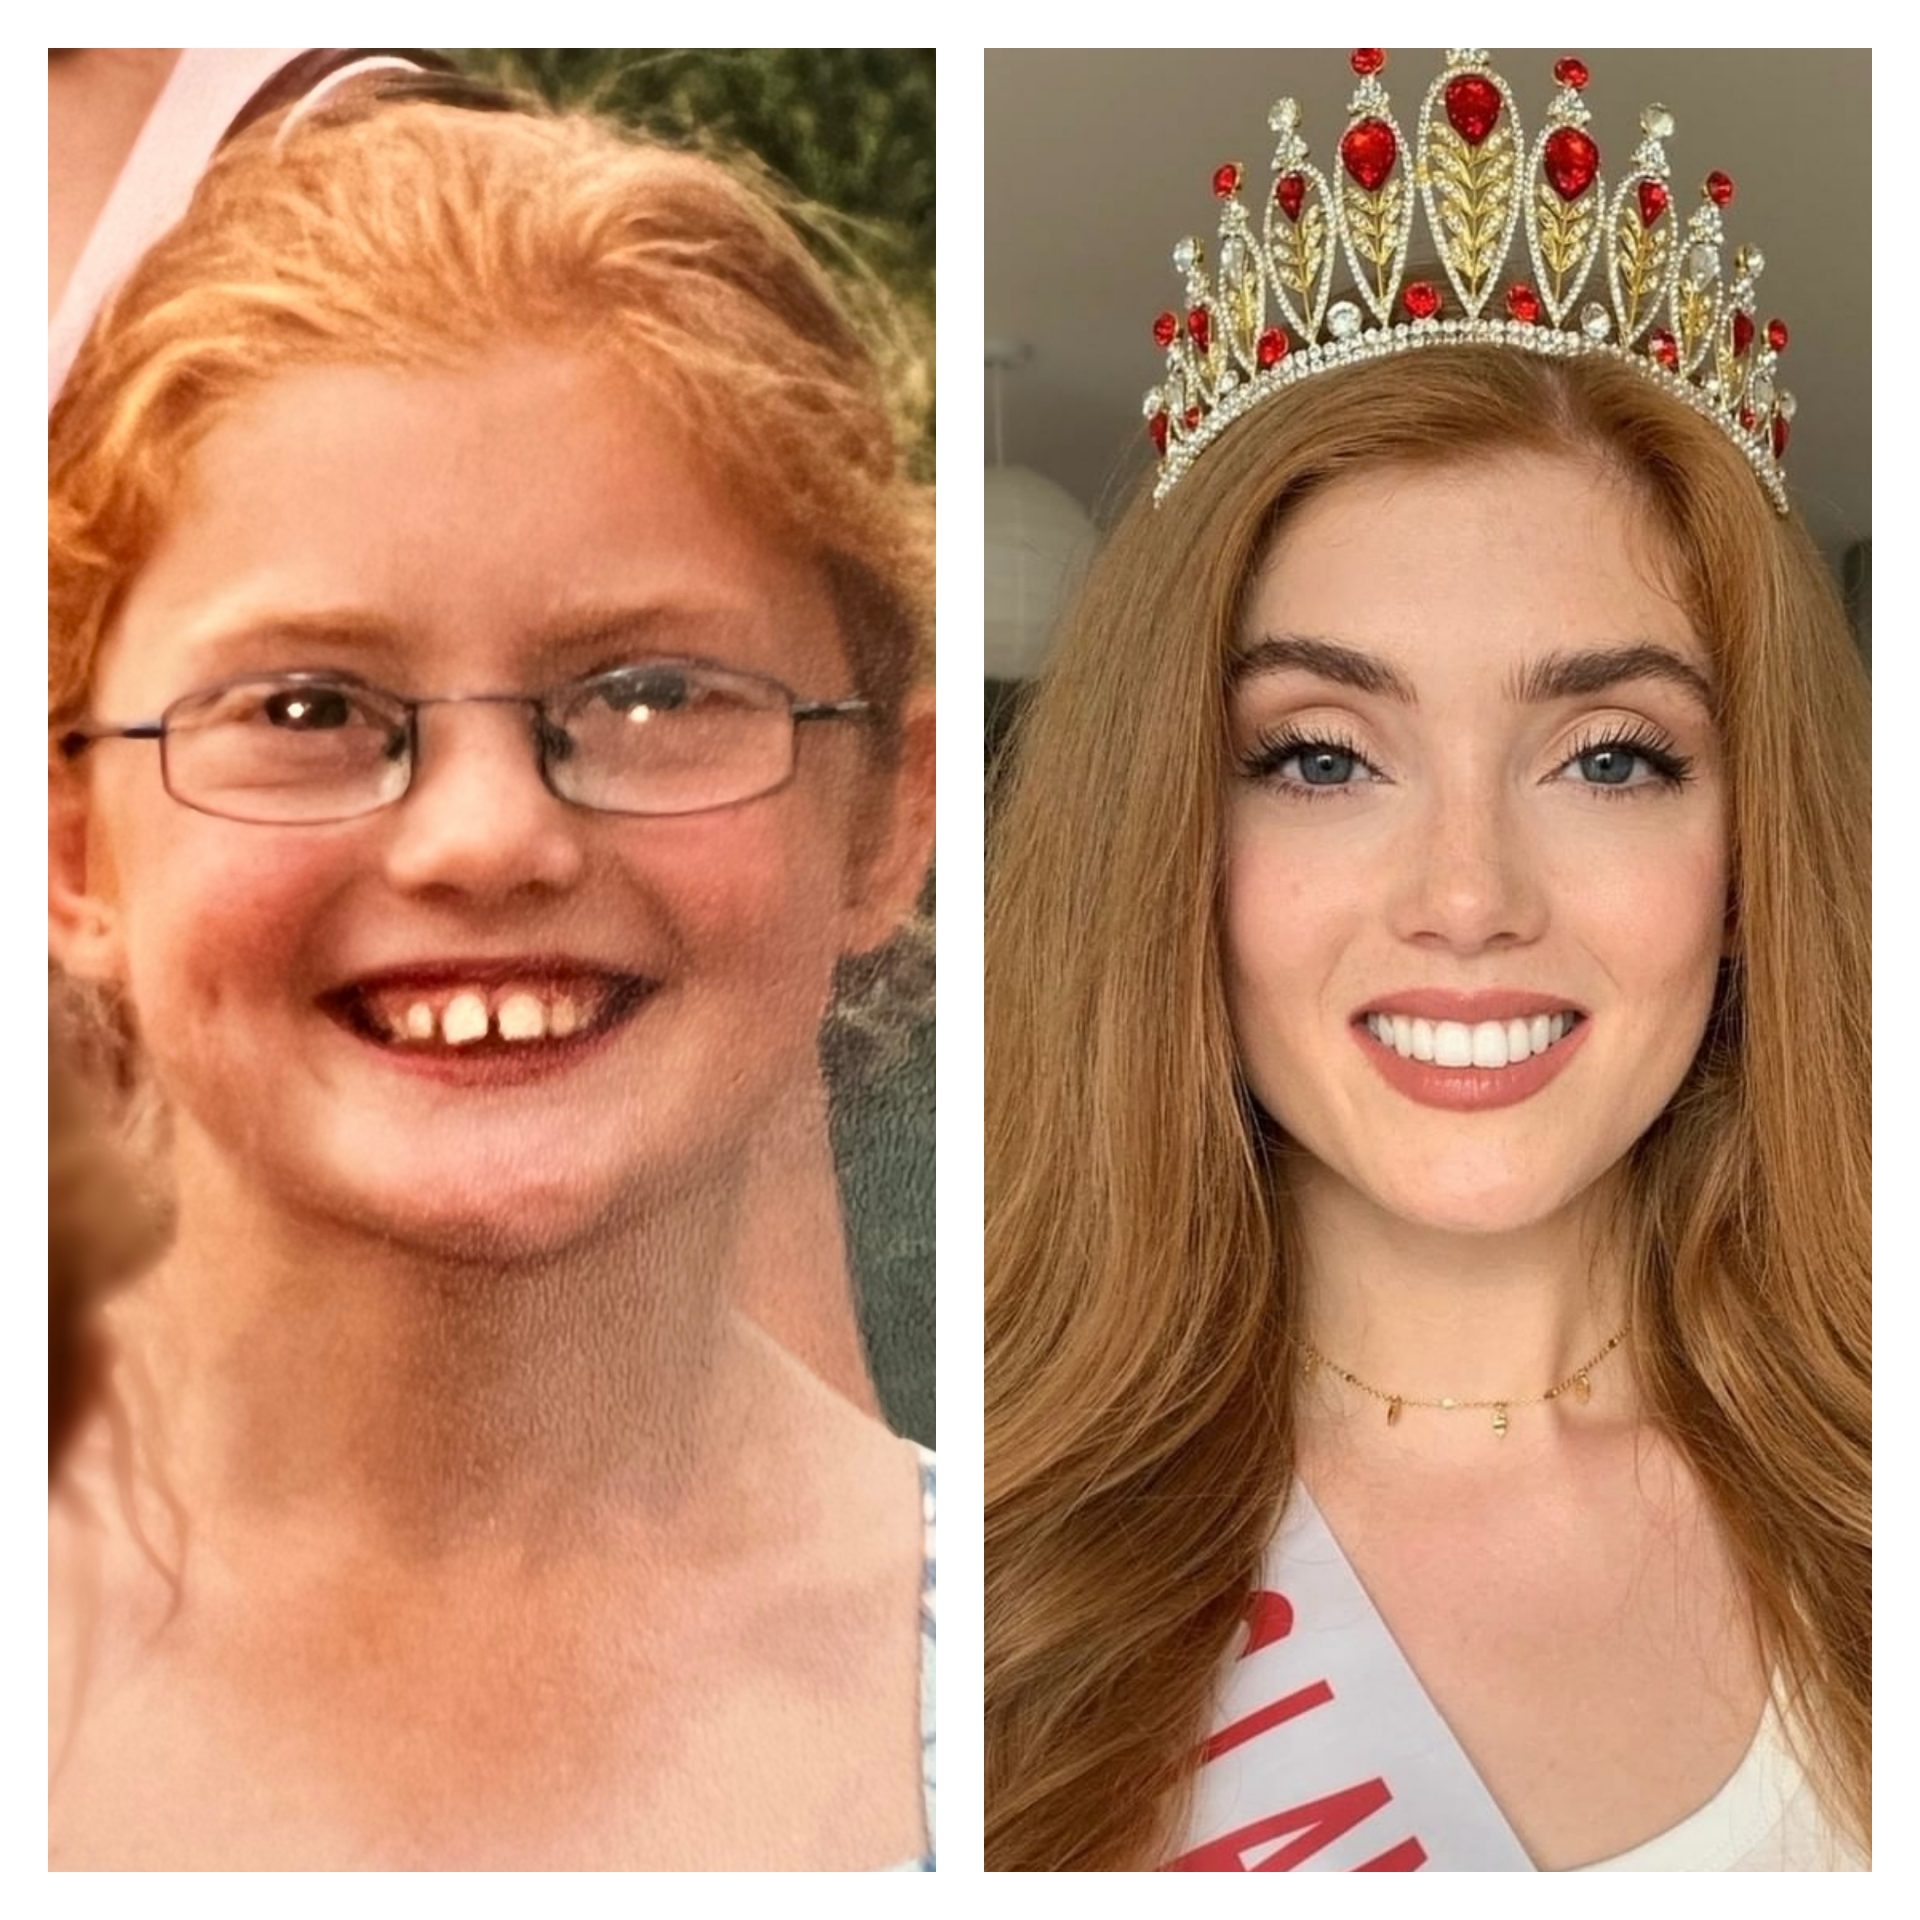 Beating the bullies for Redheads everywhere!